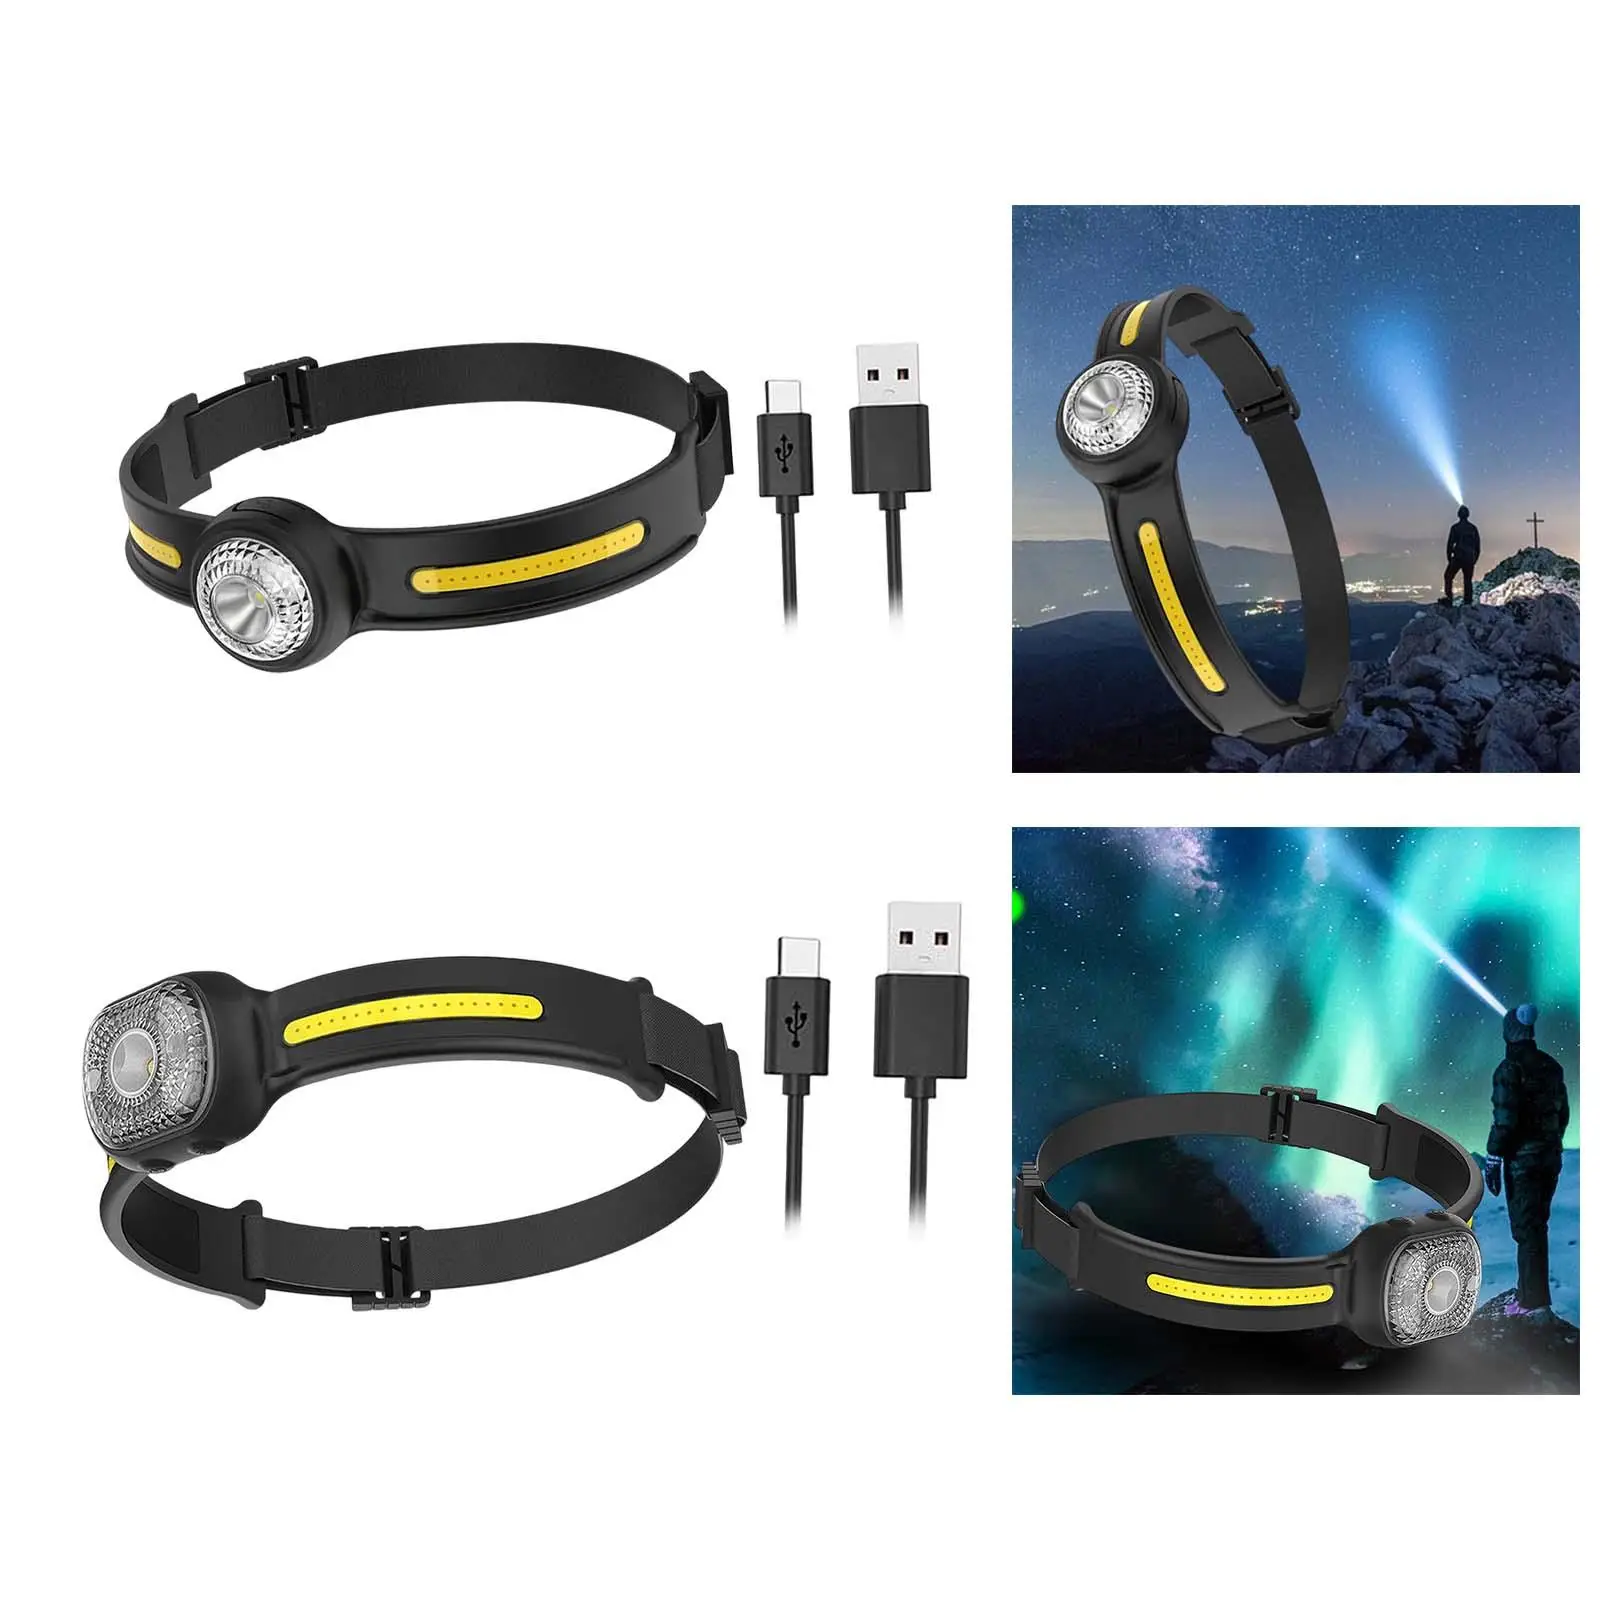 Rechargeable LED Head lamp Lightweight Flashlight spotlights Head Light 270 Degree Waterproof LED headlamps for Outdoor Cycling